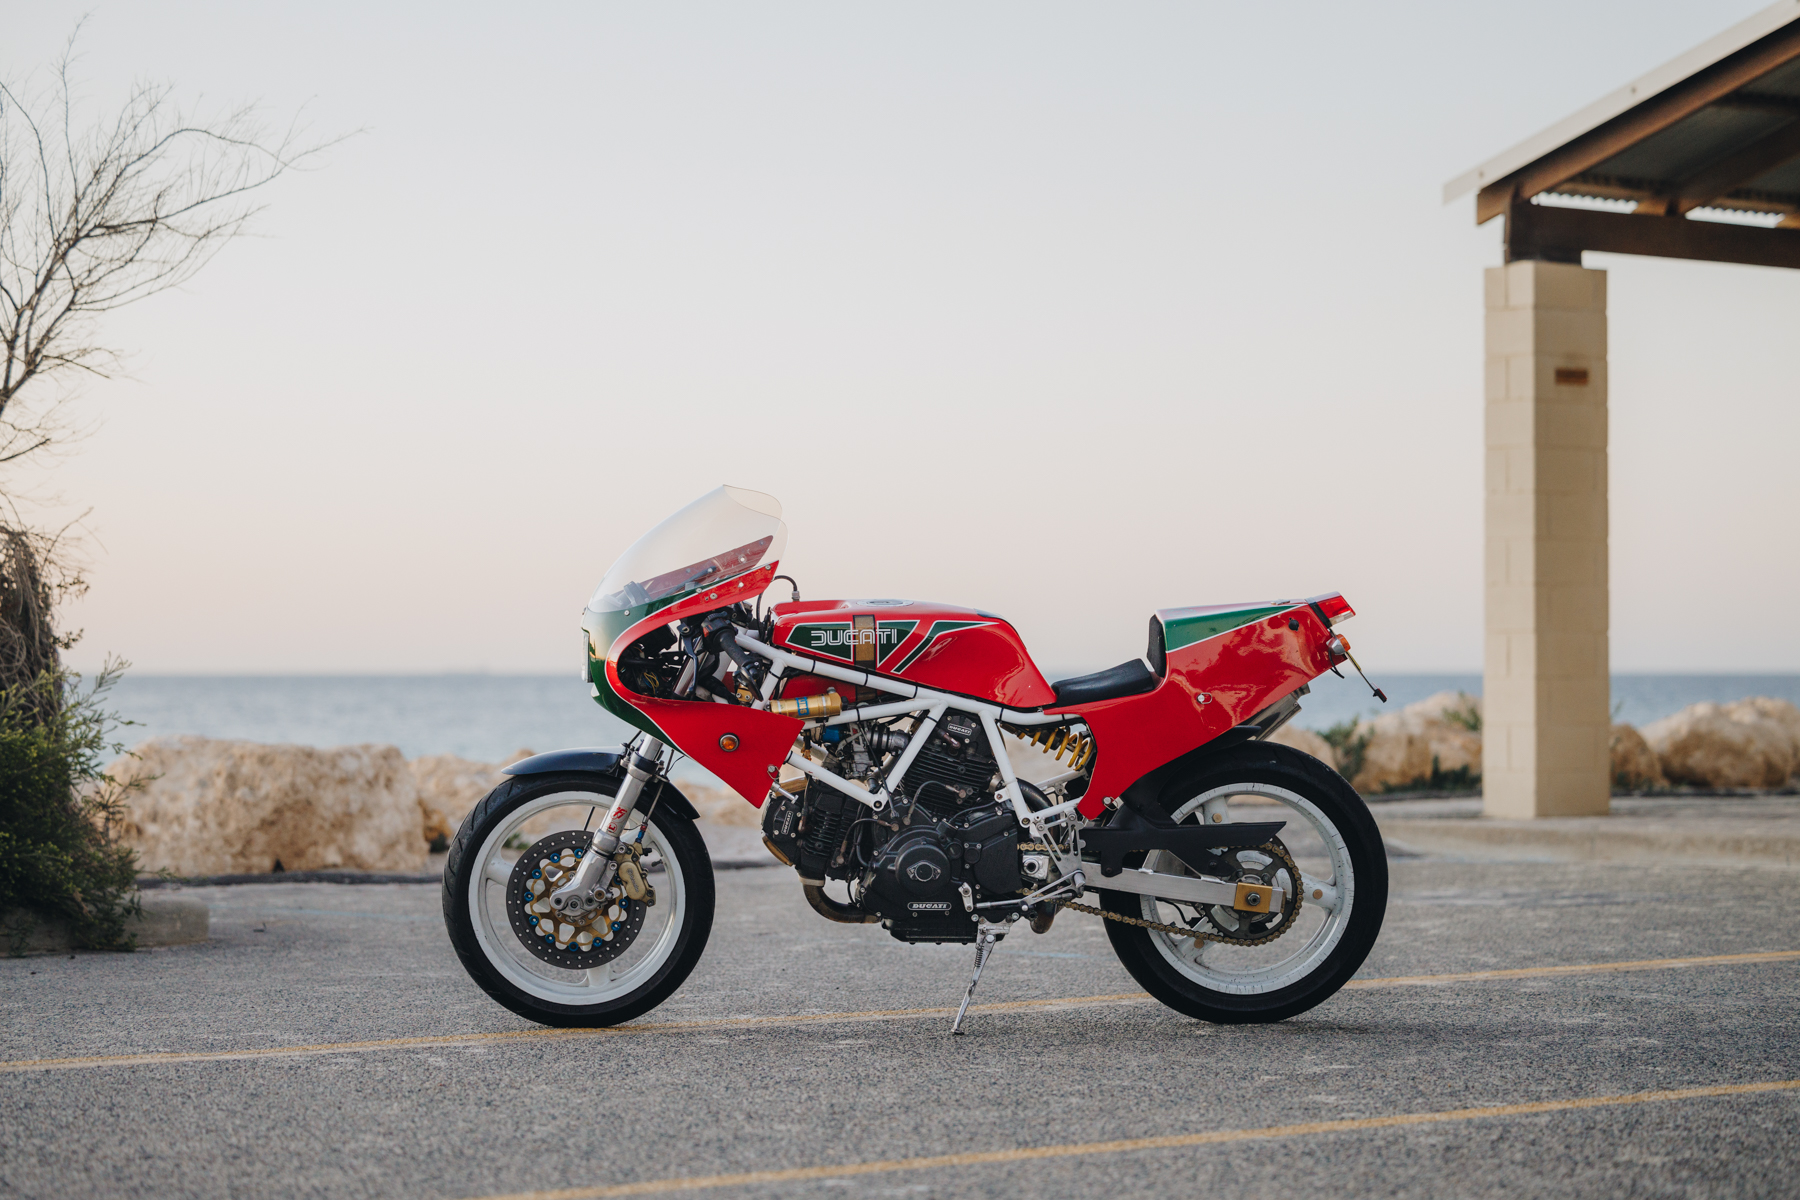 Side profile photo of a custom Ducati motorcycle parked at the beach